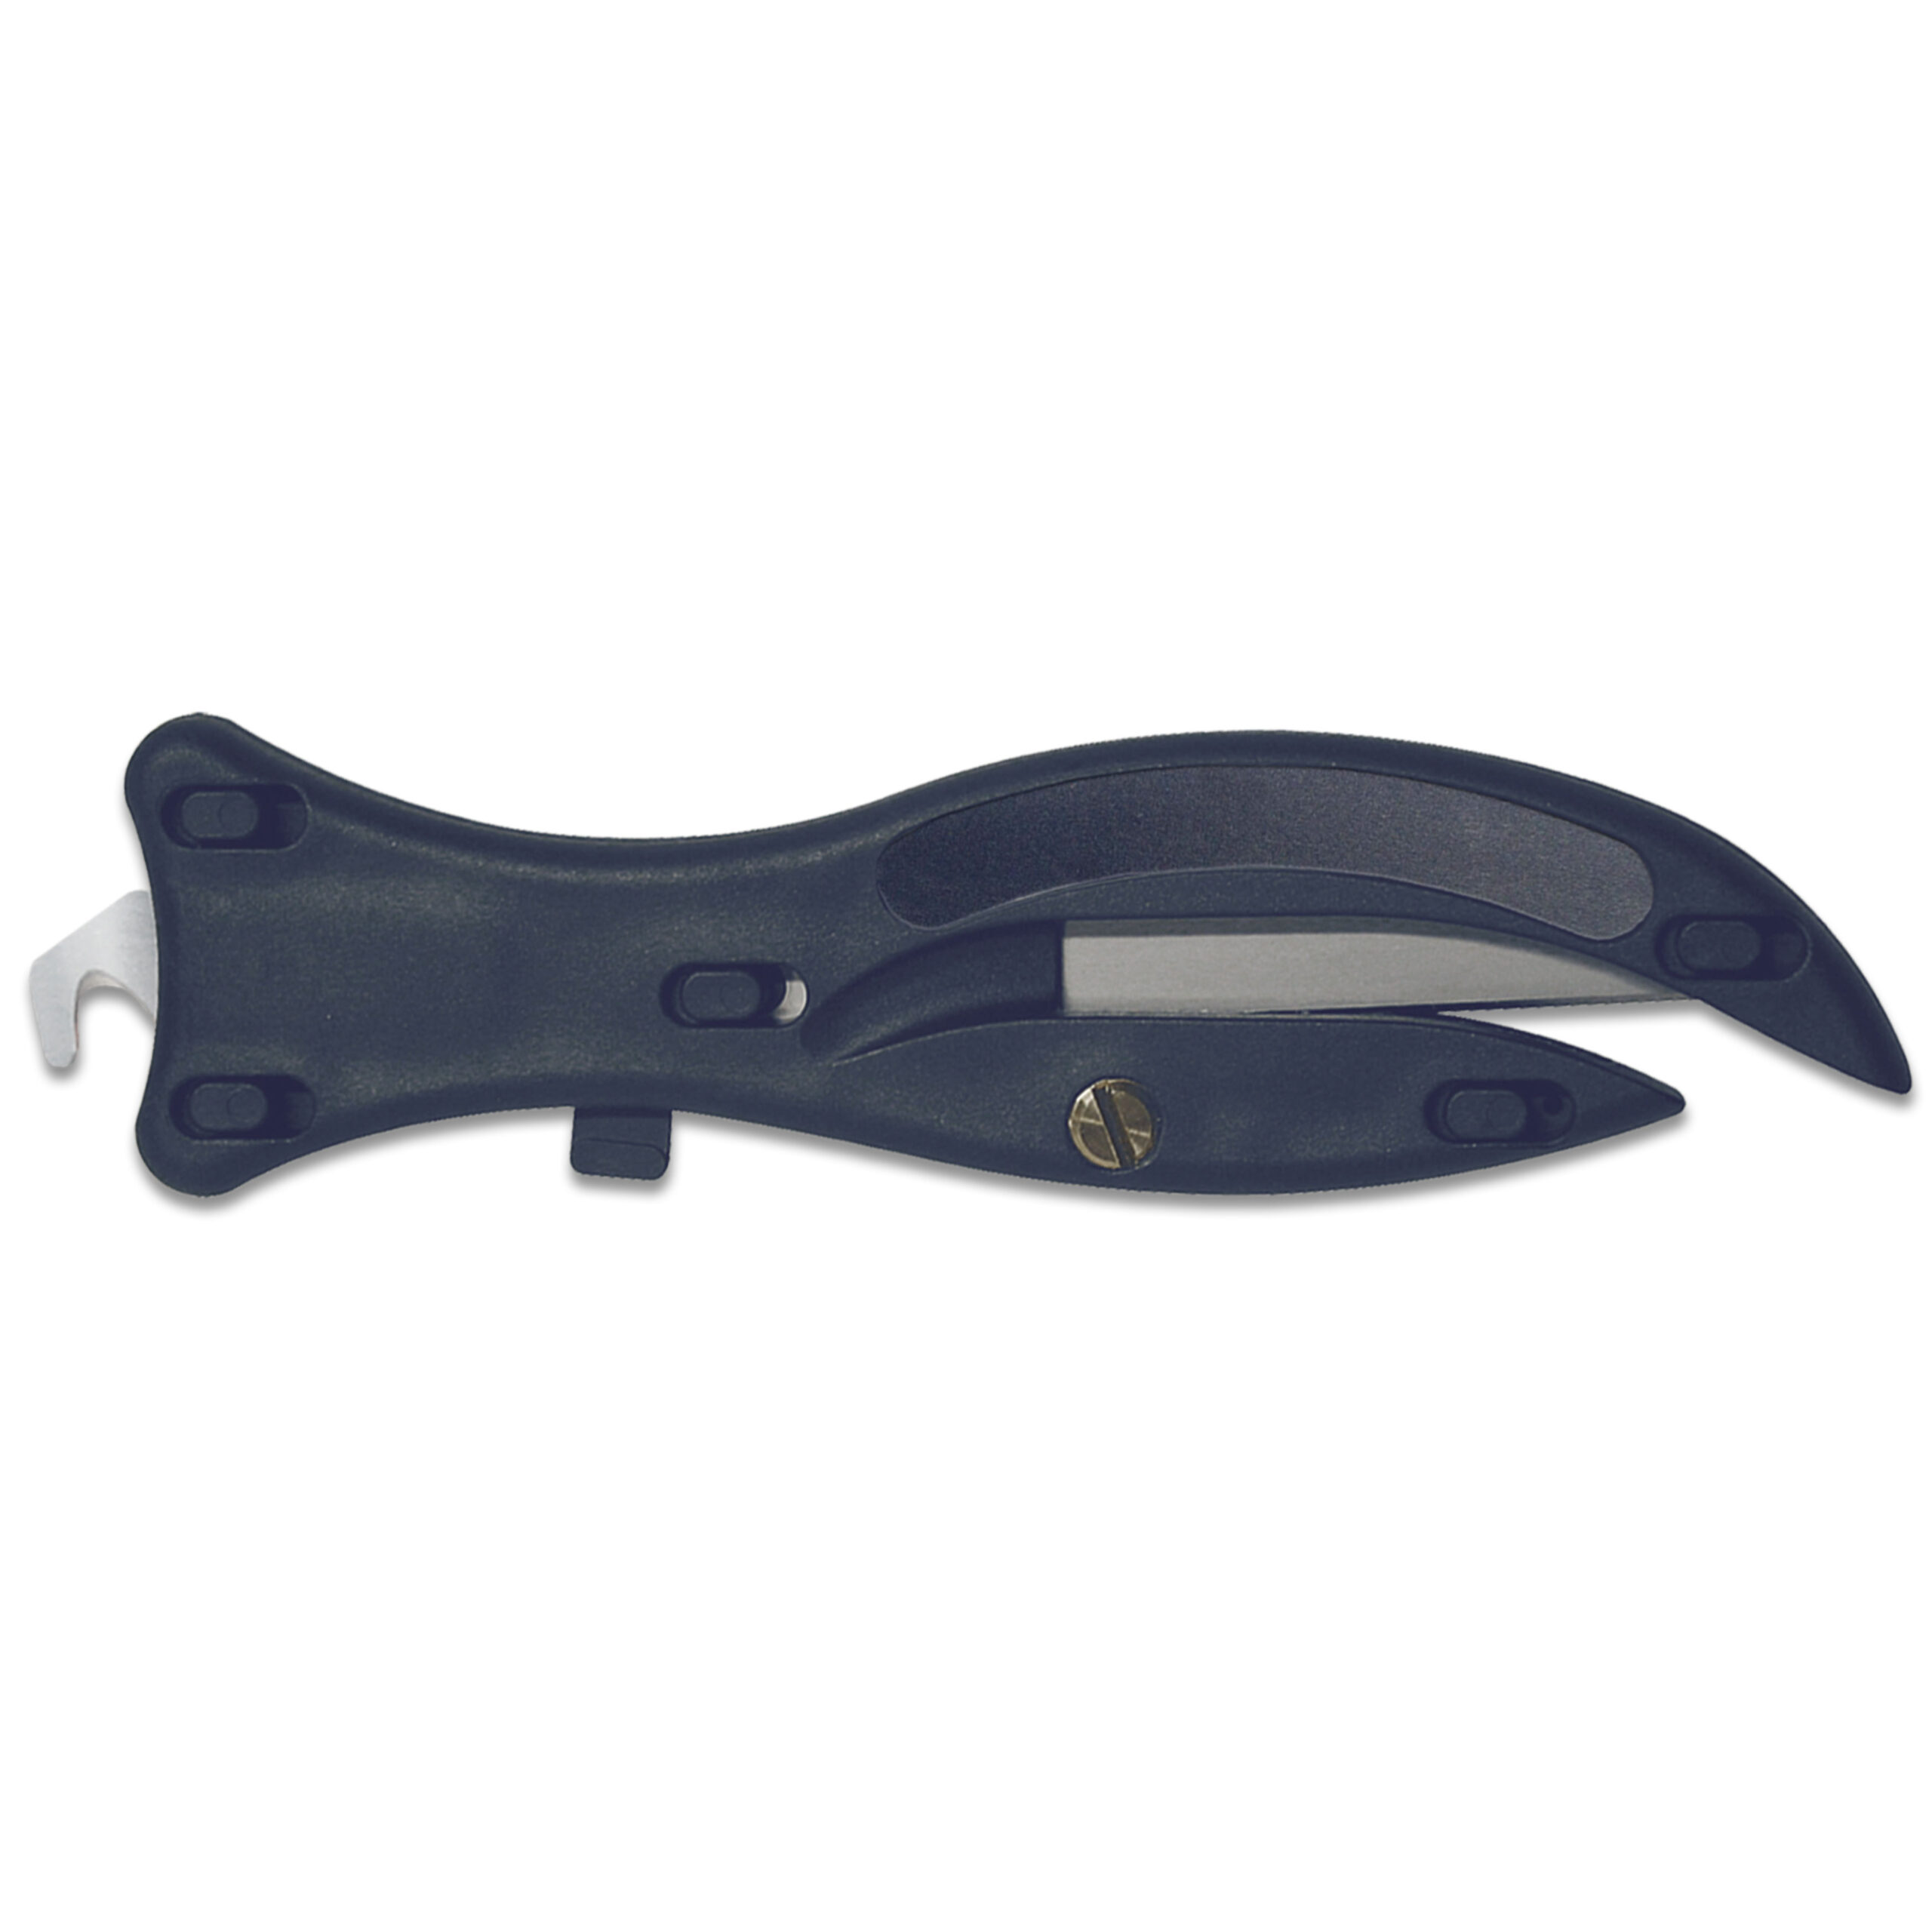 Metal Detectable Shark Safety Knife with Retracting Hook Blade